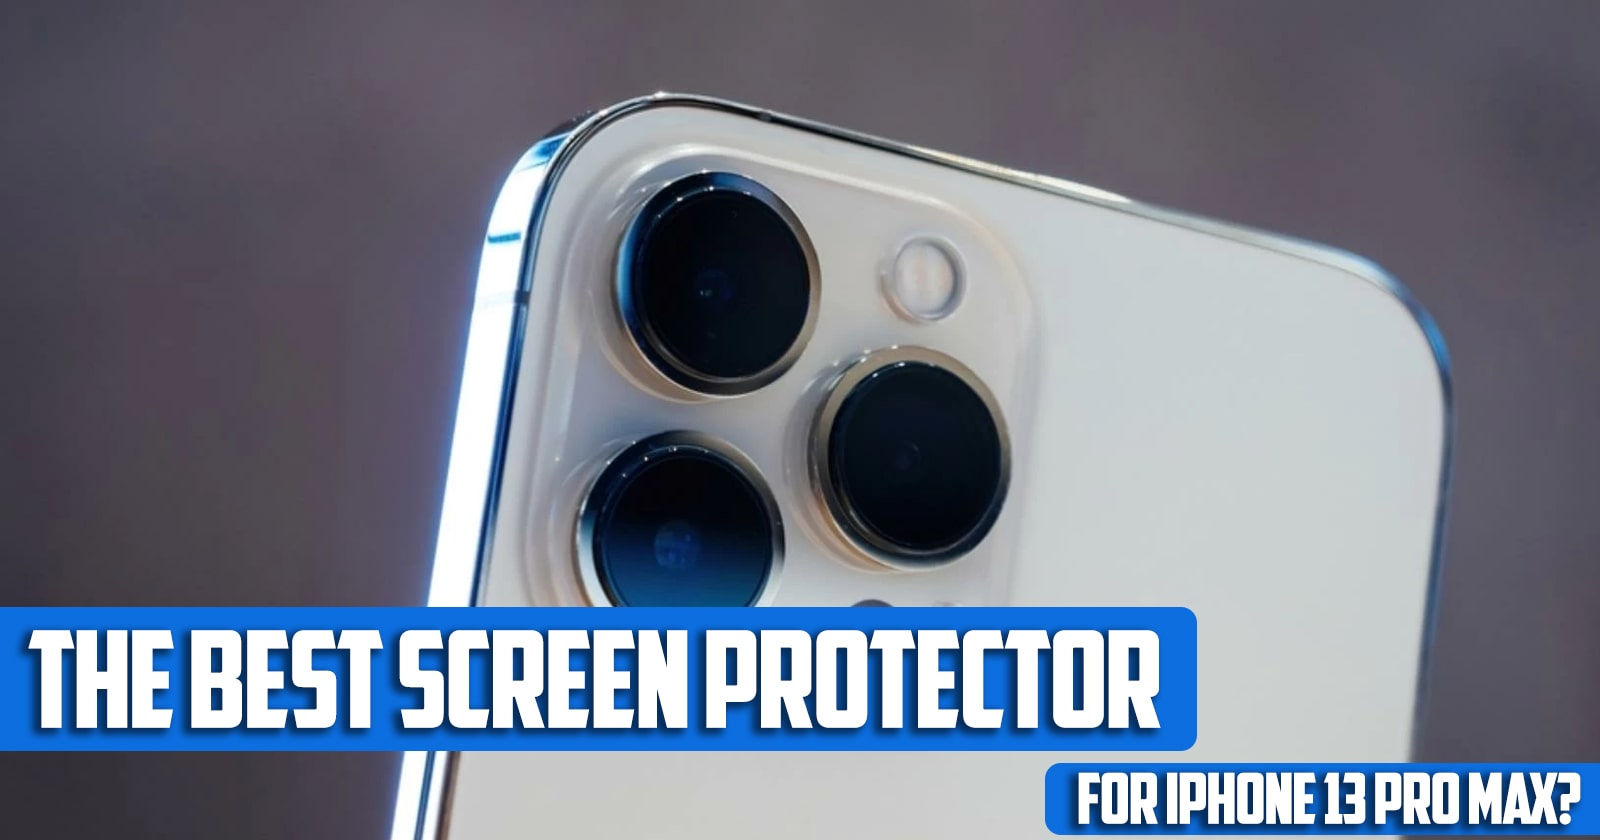 What's the best screen protector for iphone 13 pro max?